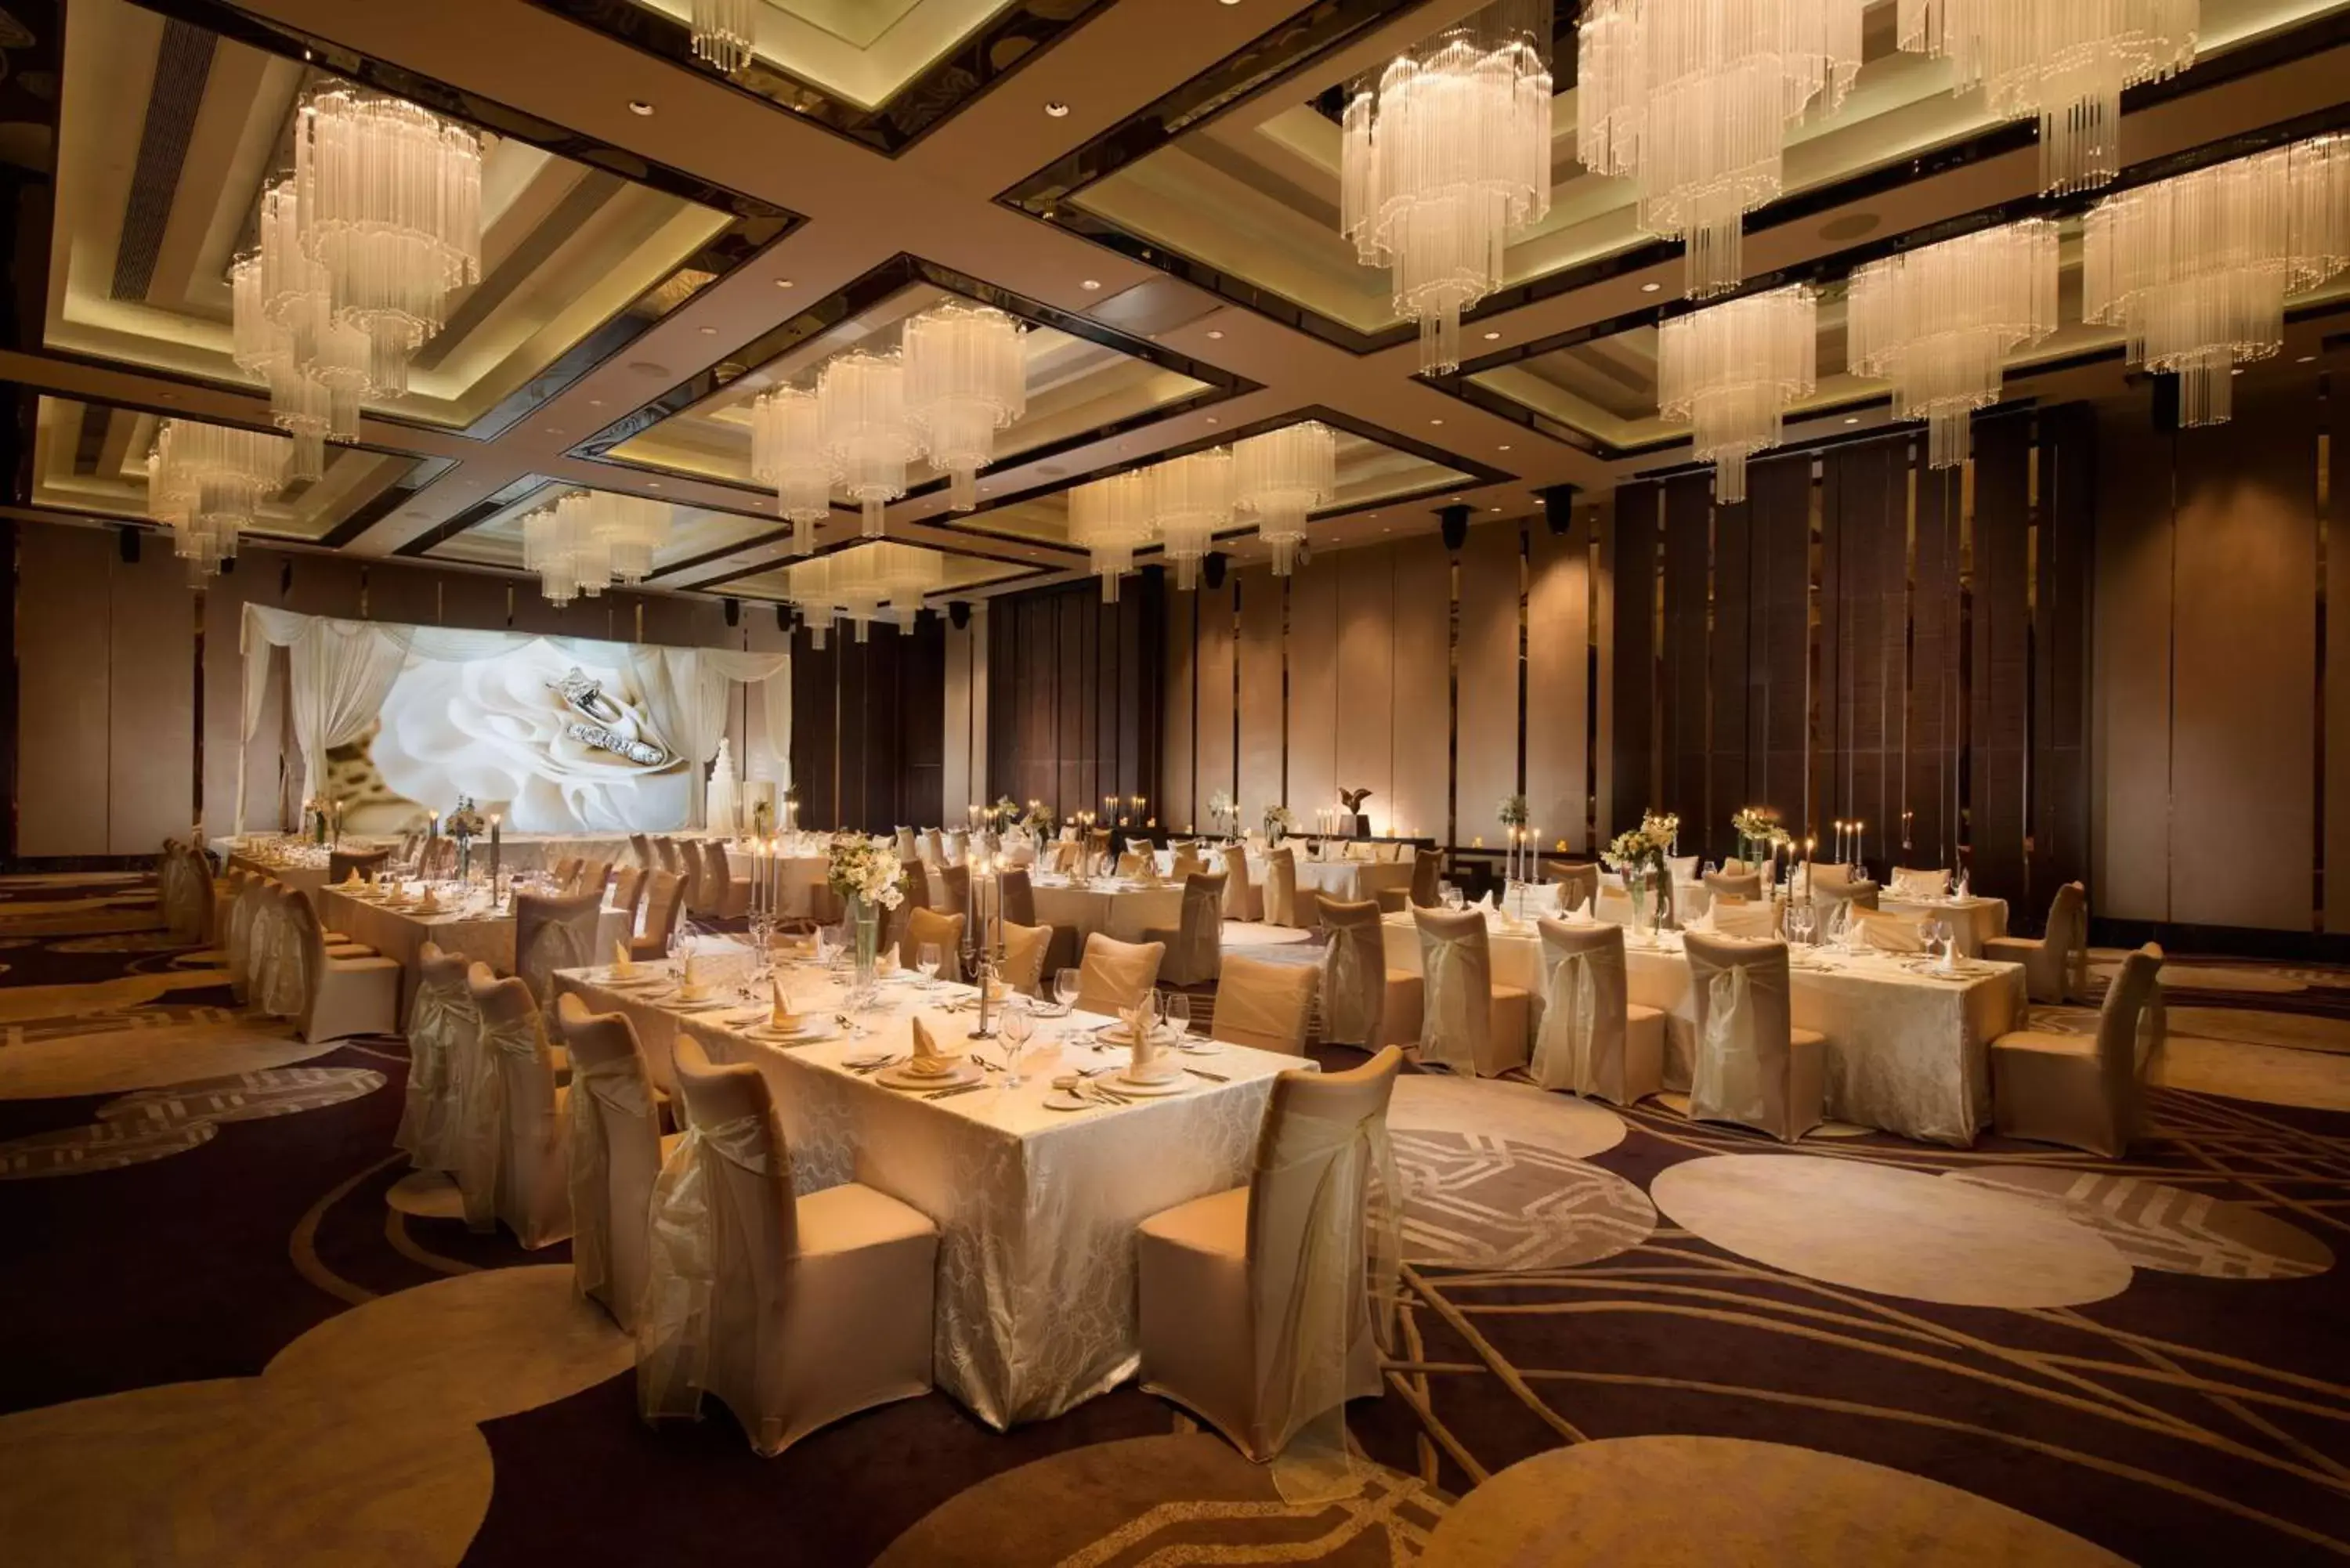 Meeting/conference room, Banquet Facilities in Hilton Shenzhen Futian, Metro Station at Hotel Front Door, Close to Futian Convention & Exhibition Center